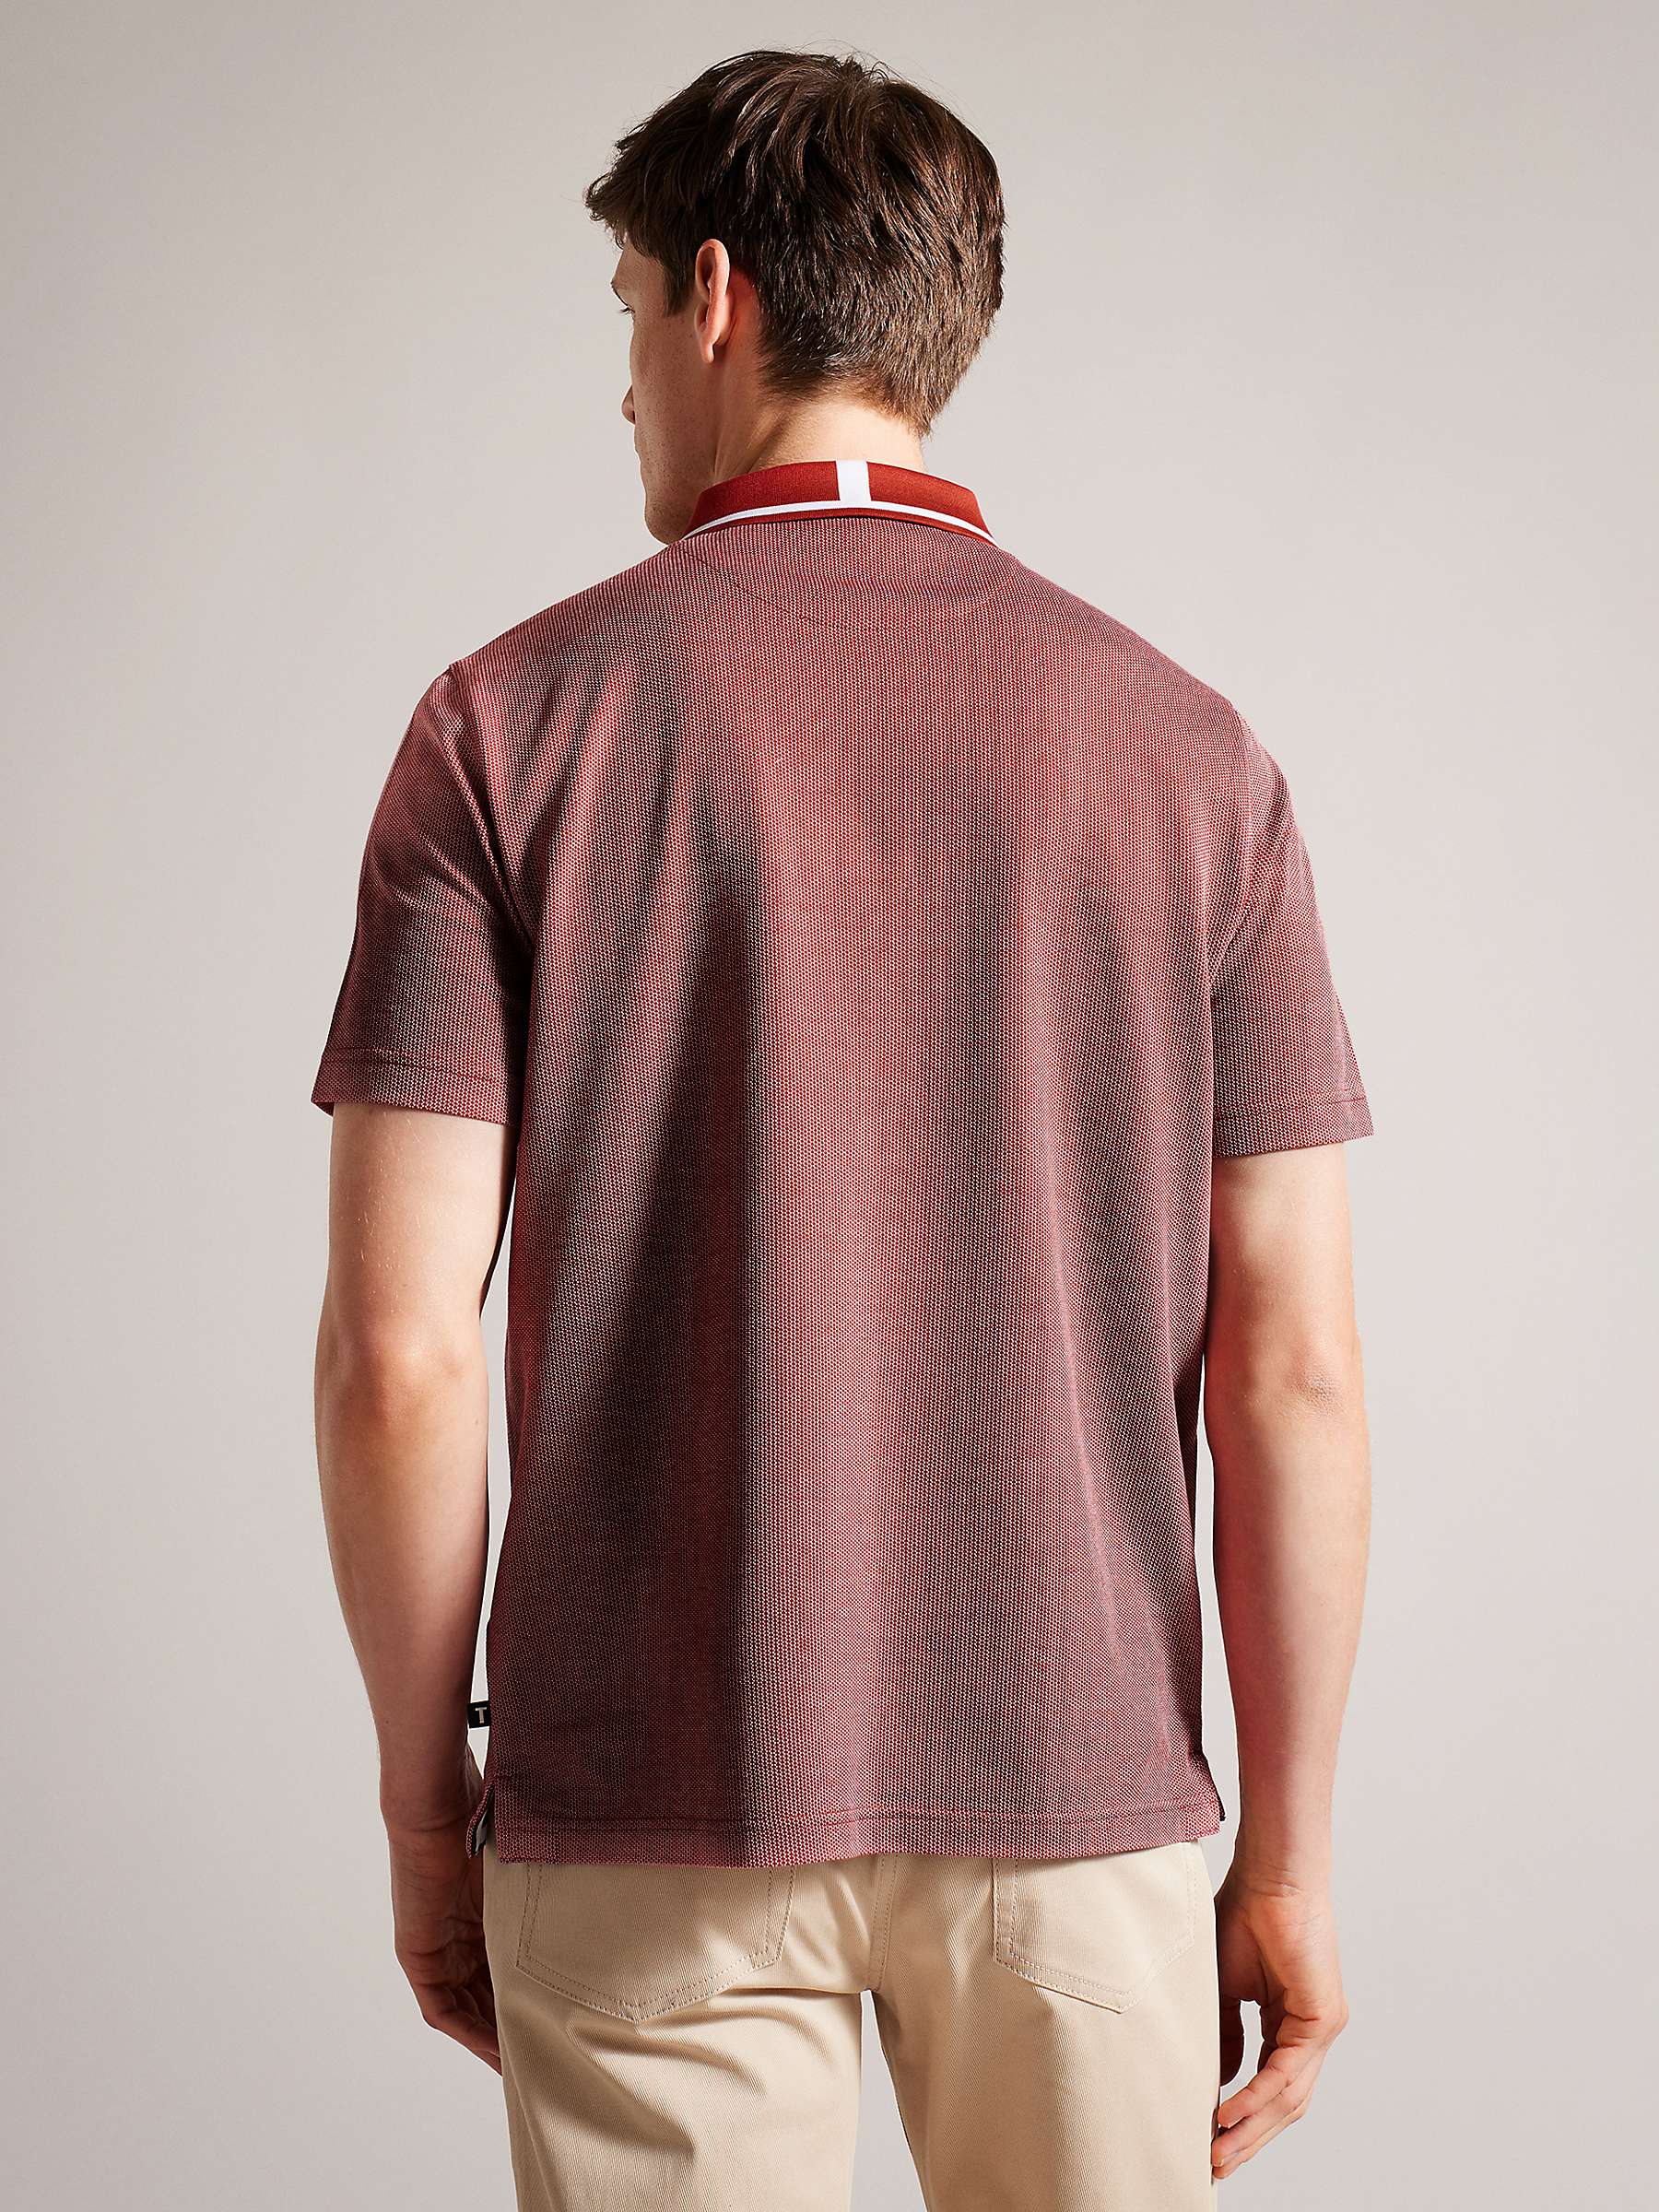 Buy Ted Baker Arts Mini Jacquard Stitch Polo, Red Dark Online at johnlewis.com